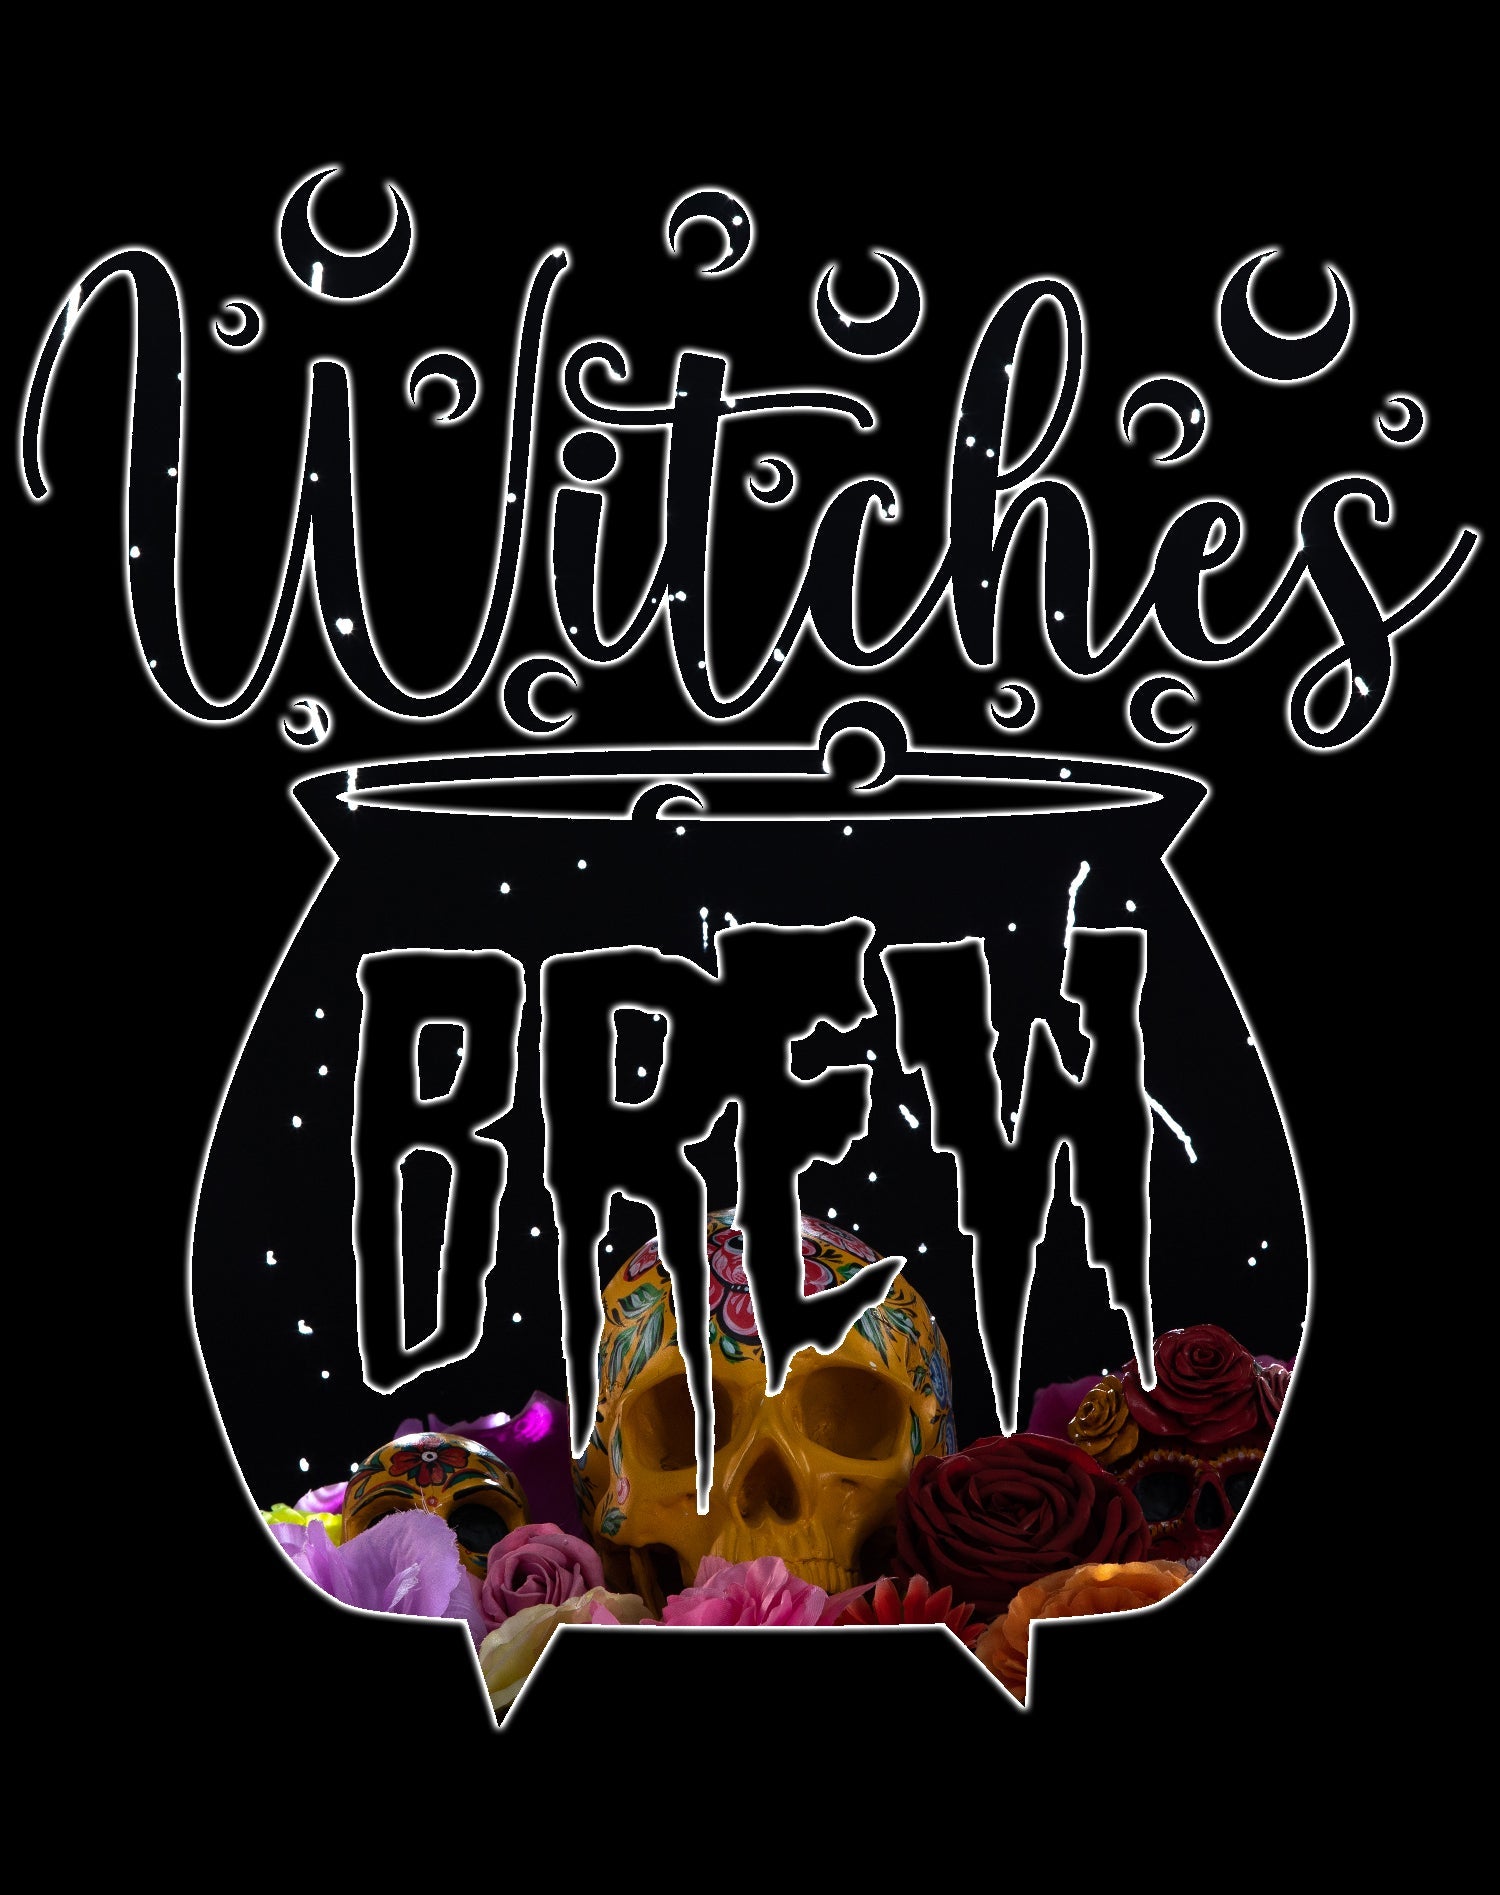 Halloween Occult Witches Brew Meme Edgy Slogan Cauldron Lol Official Women's T-shirt